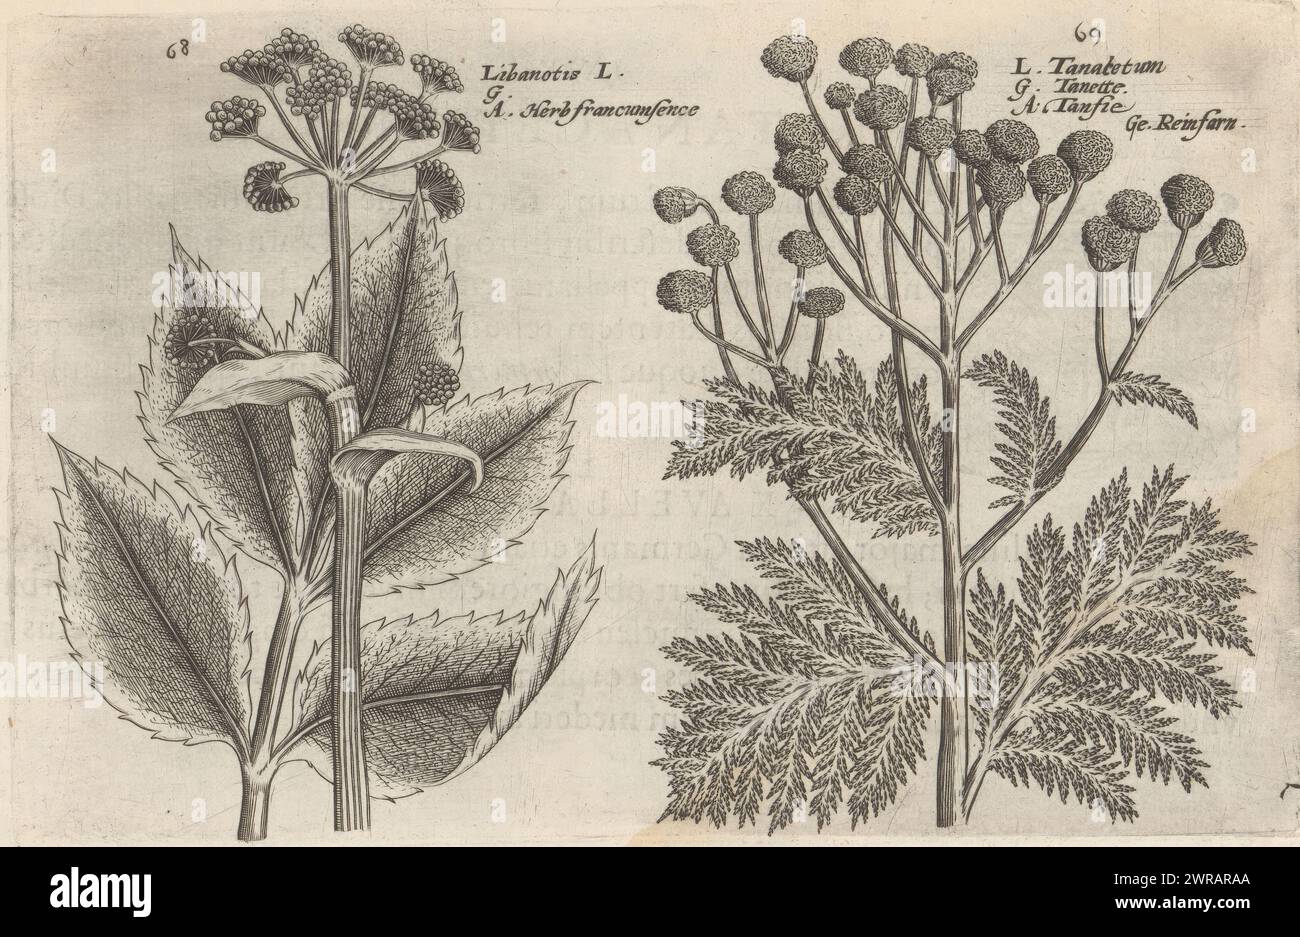 Deerroot and tansy, Libanotis / Herb francumsence (title on object), Tanacetum / Tanette / Tanfie / Reinfarn (title on object), Flower garden, the other part (series title), Altera pars horti floridi (series title), Flower garden (series title) ), Hortus floridus (series title), The images are numbered: 68 and 69. Print is part of a book., print maker: Crispijn van de Passe (II), (attributed to), after design by: Crispijn van de Passe (I), (attributed to), publisher: Johannes Janssonius, Arnhem, 1617, paper, engraving, height 127 mm × width 196 mm Stock Photo